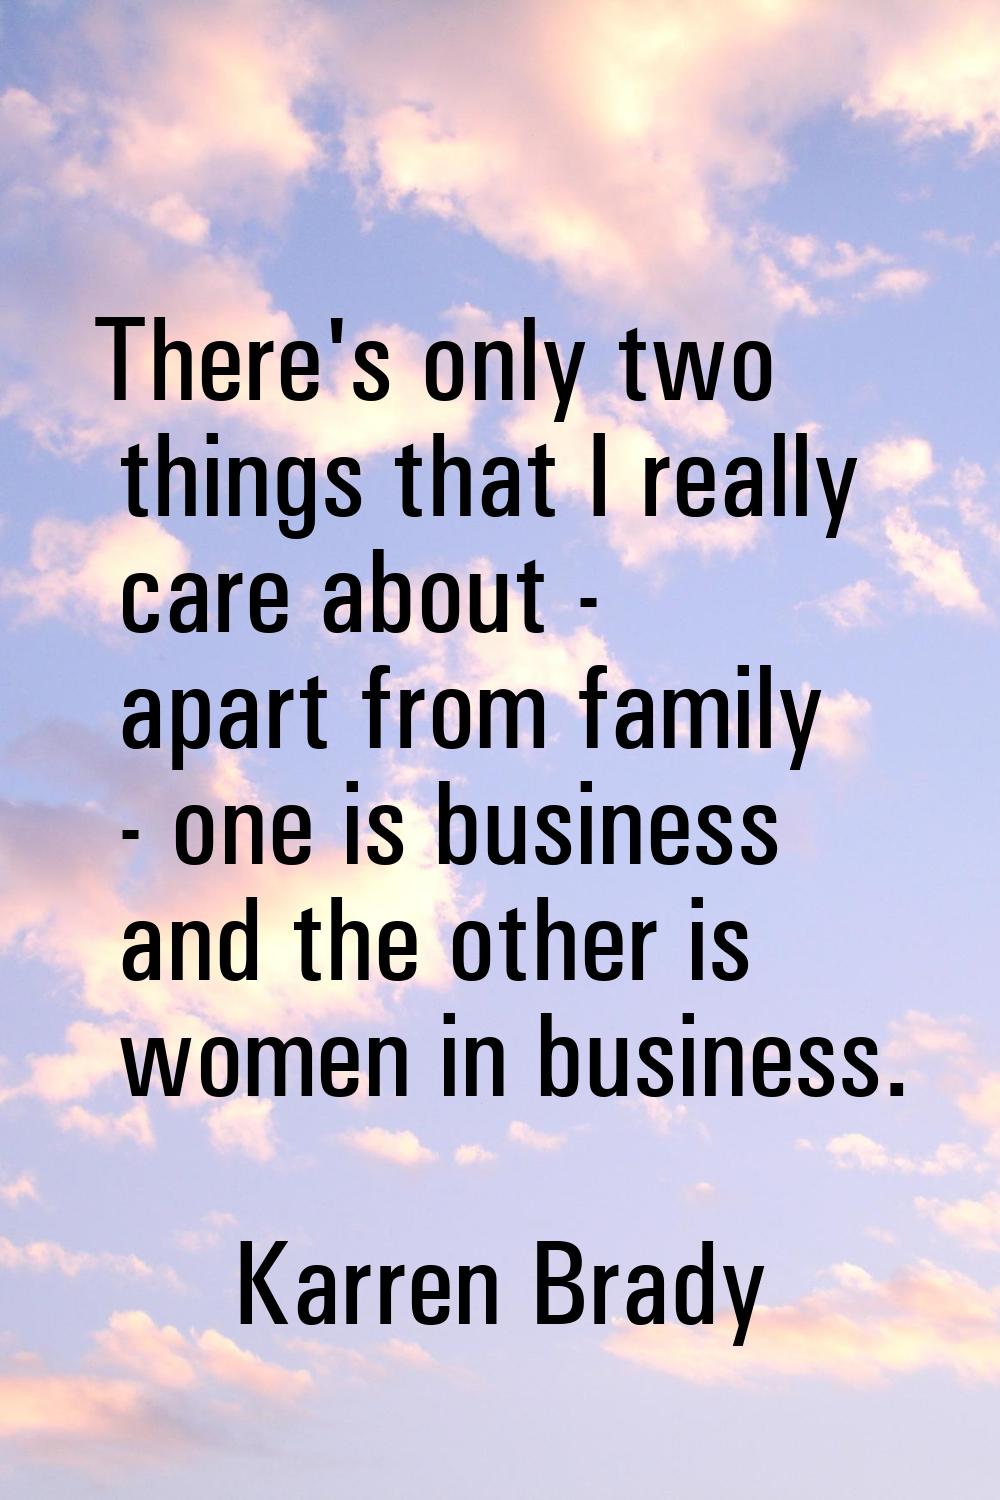 There's only two things that I really care about - apart from family - one is business and the othe